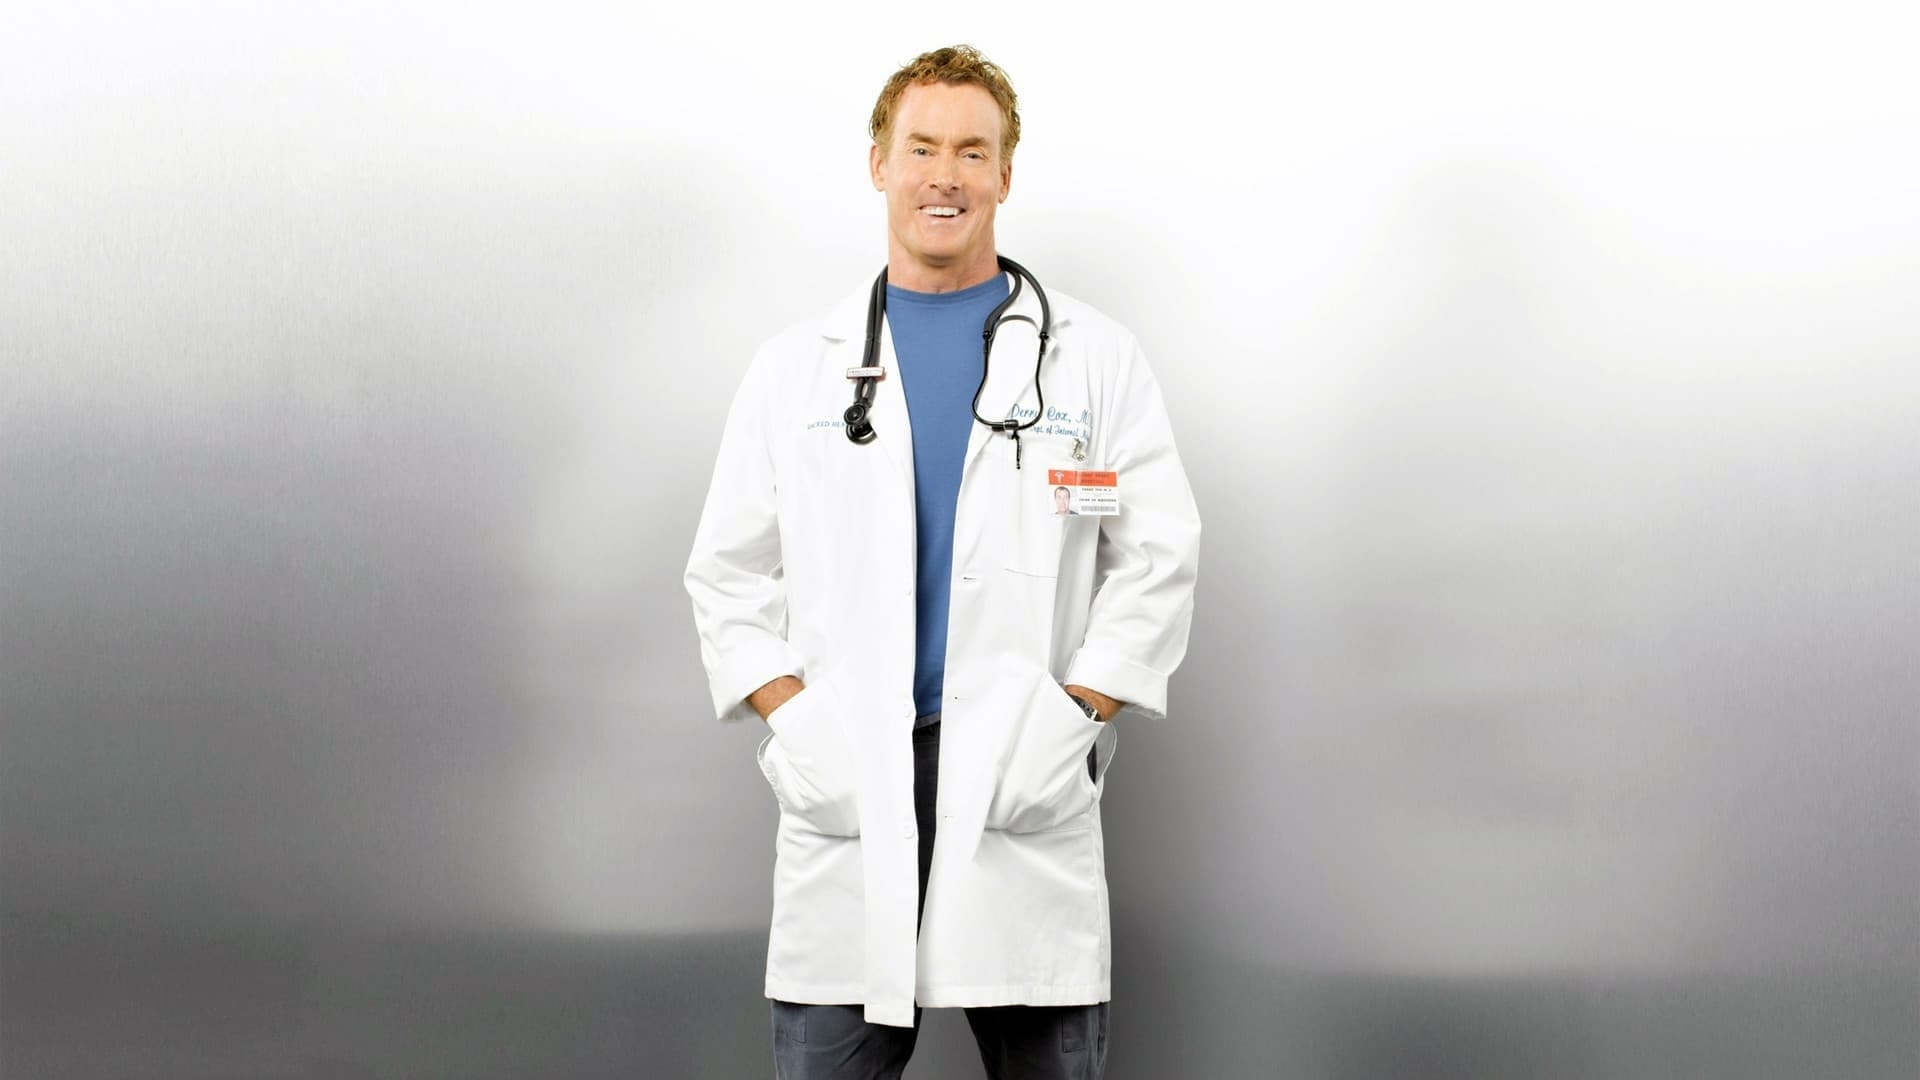 Scrubs (TV Series): Perry Cox, The Chief of Medicine and Attending Physician at New Sacred Heart Hospital. 1920x1080 Full HD Wallpaper.